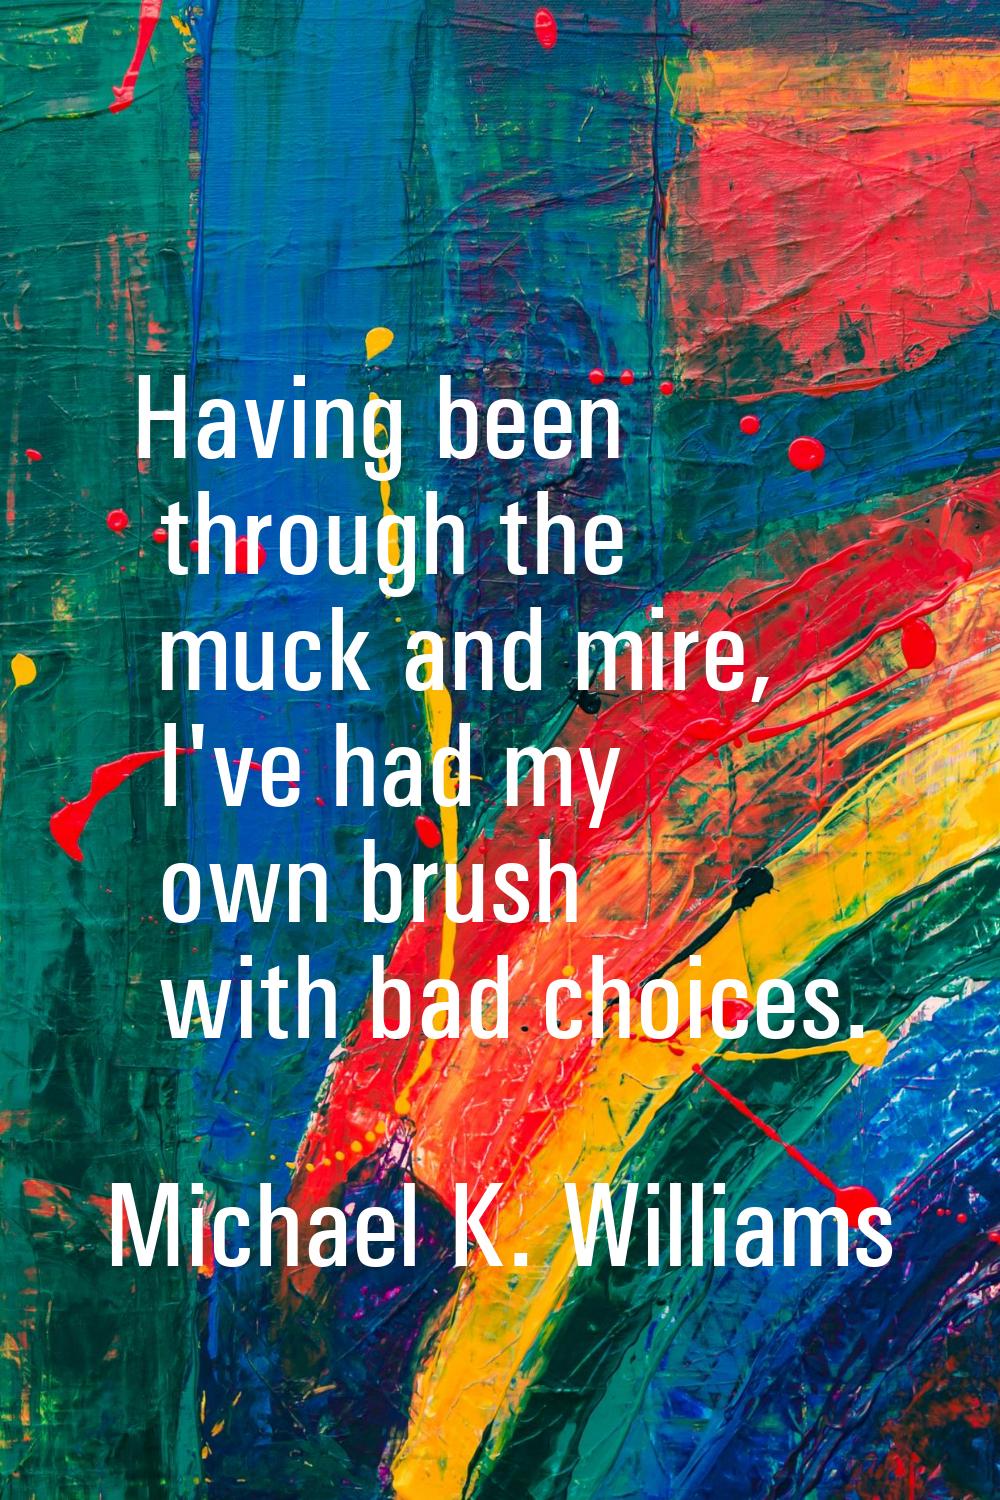 Having been through the muck and mire, I've had my own brush with bad choices.